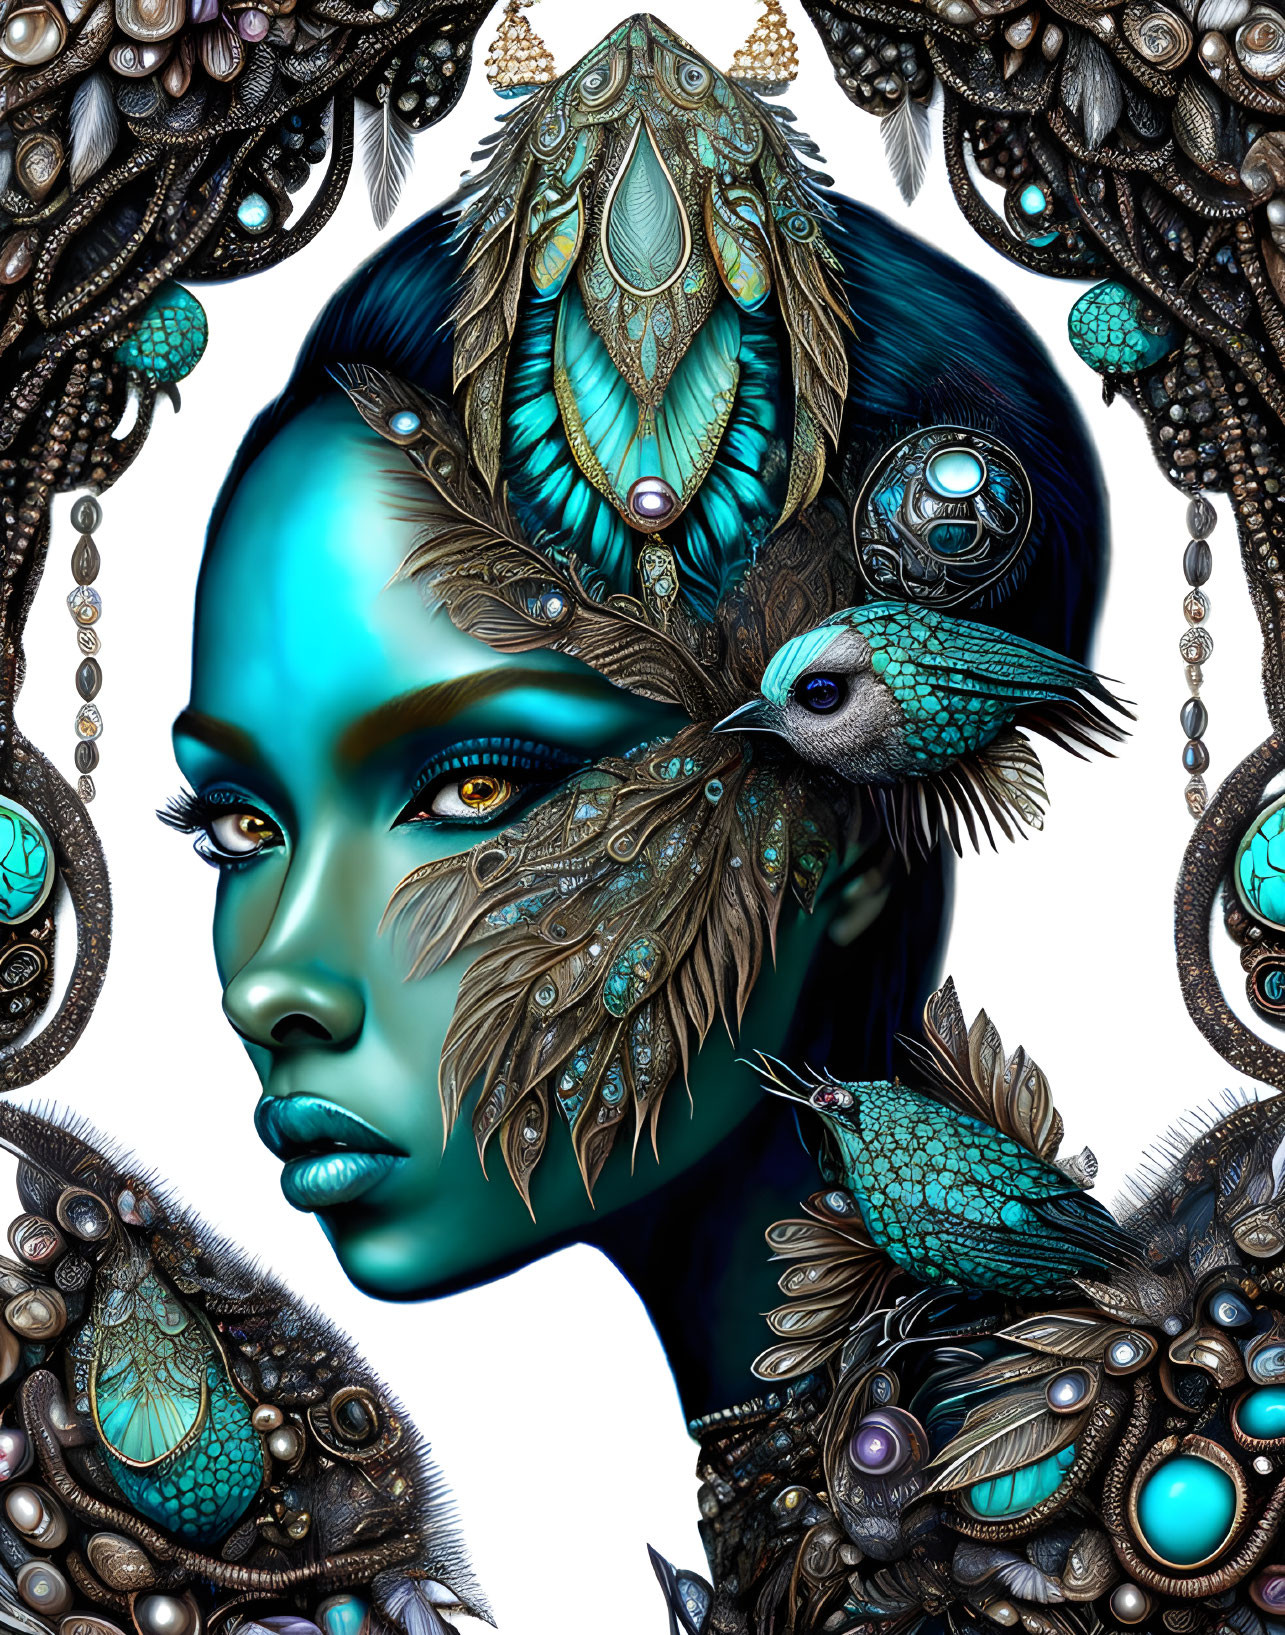 Blue-skinned woman with peacock feather accessories in digital art